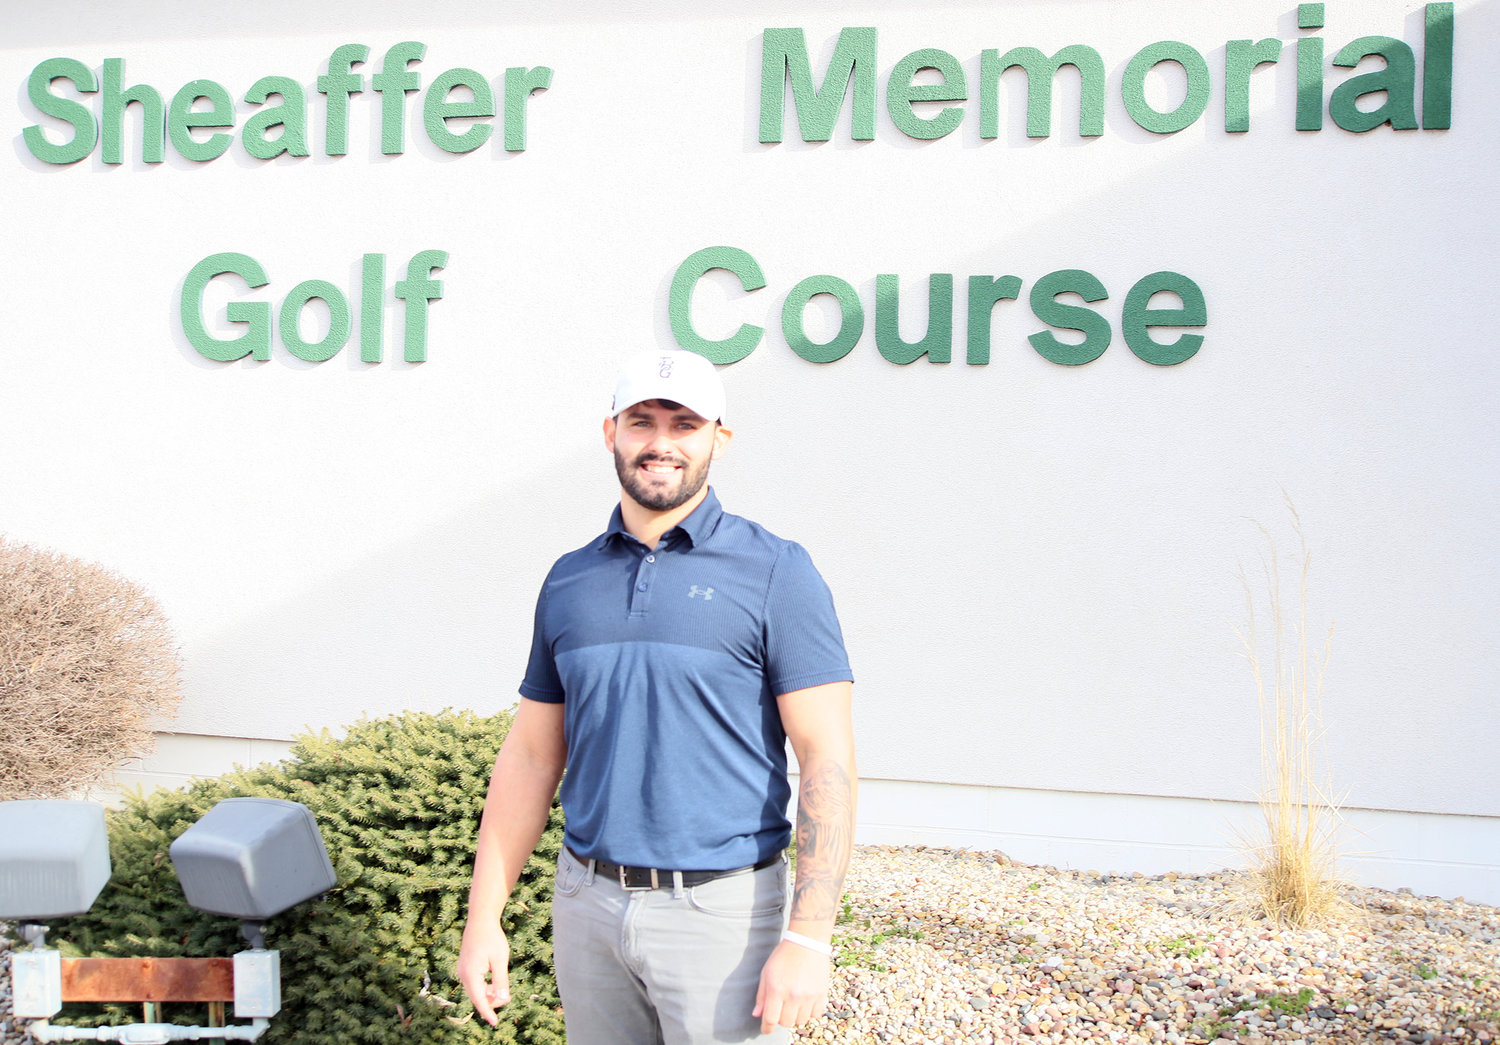 Jacob Goldstick is the new club manager at Sheaffer Golf Course. At just 27 years of age, Goldstick said he wants to bring energy and technology to the course in a position he calls his "dream job."